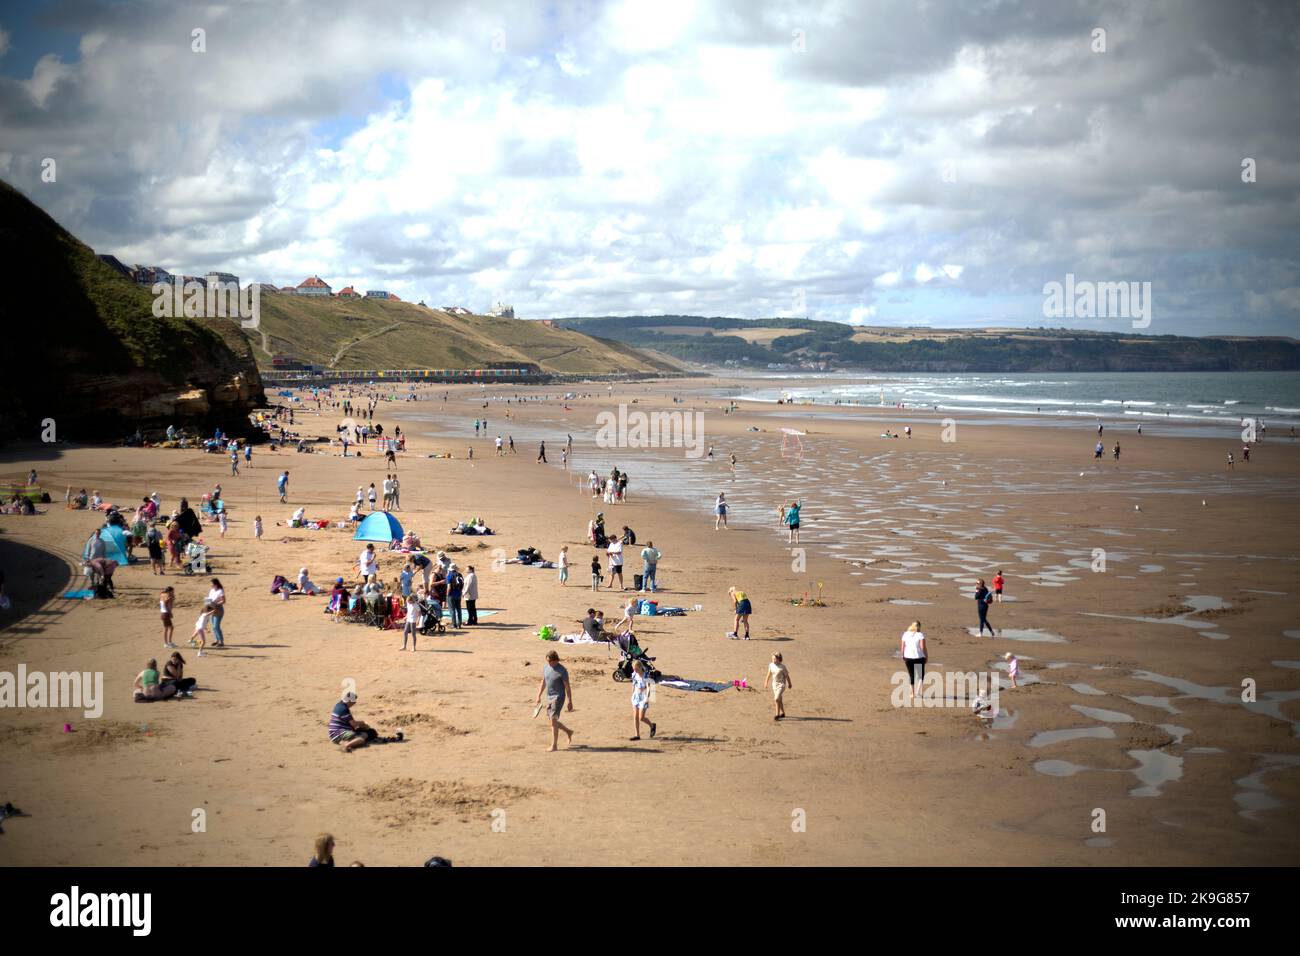 The beach in the seaside town of Whitby in North Yorkshire in Northern England. Stock Photo